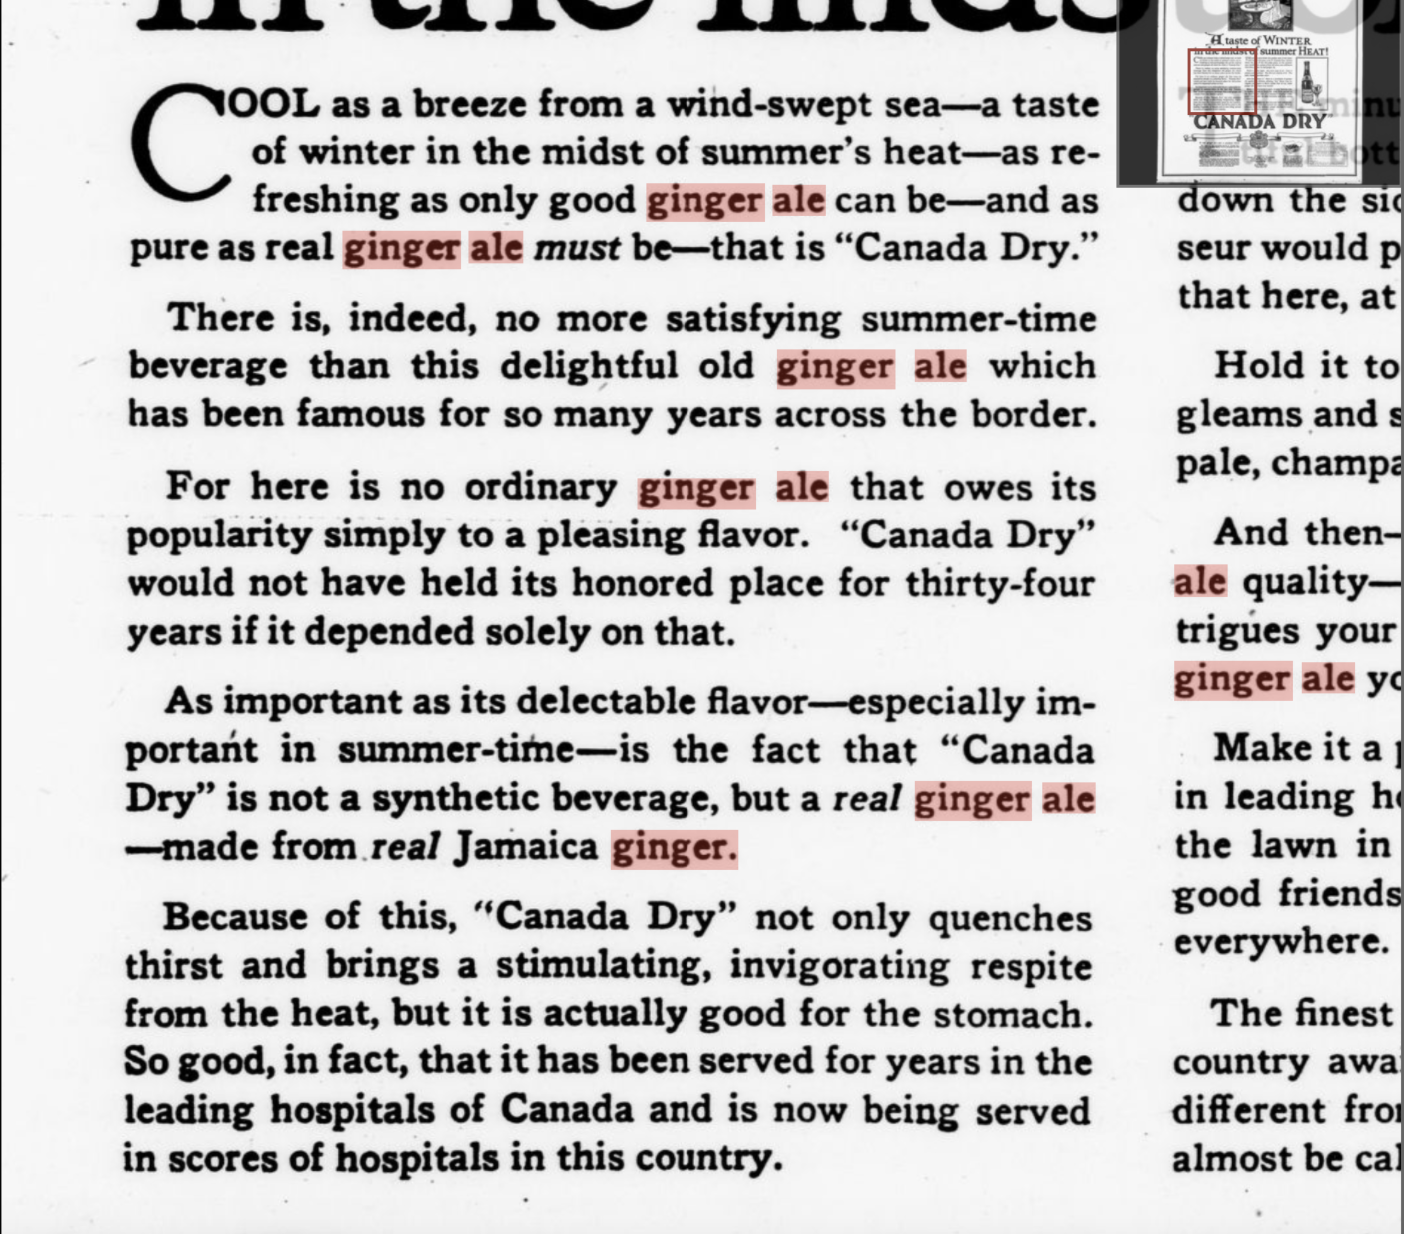 A Canada Dry ad in a 1924 issue of the Washington DC Evening star newspaper.